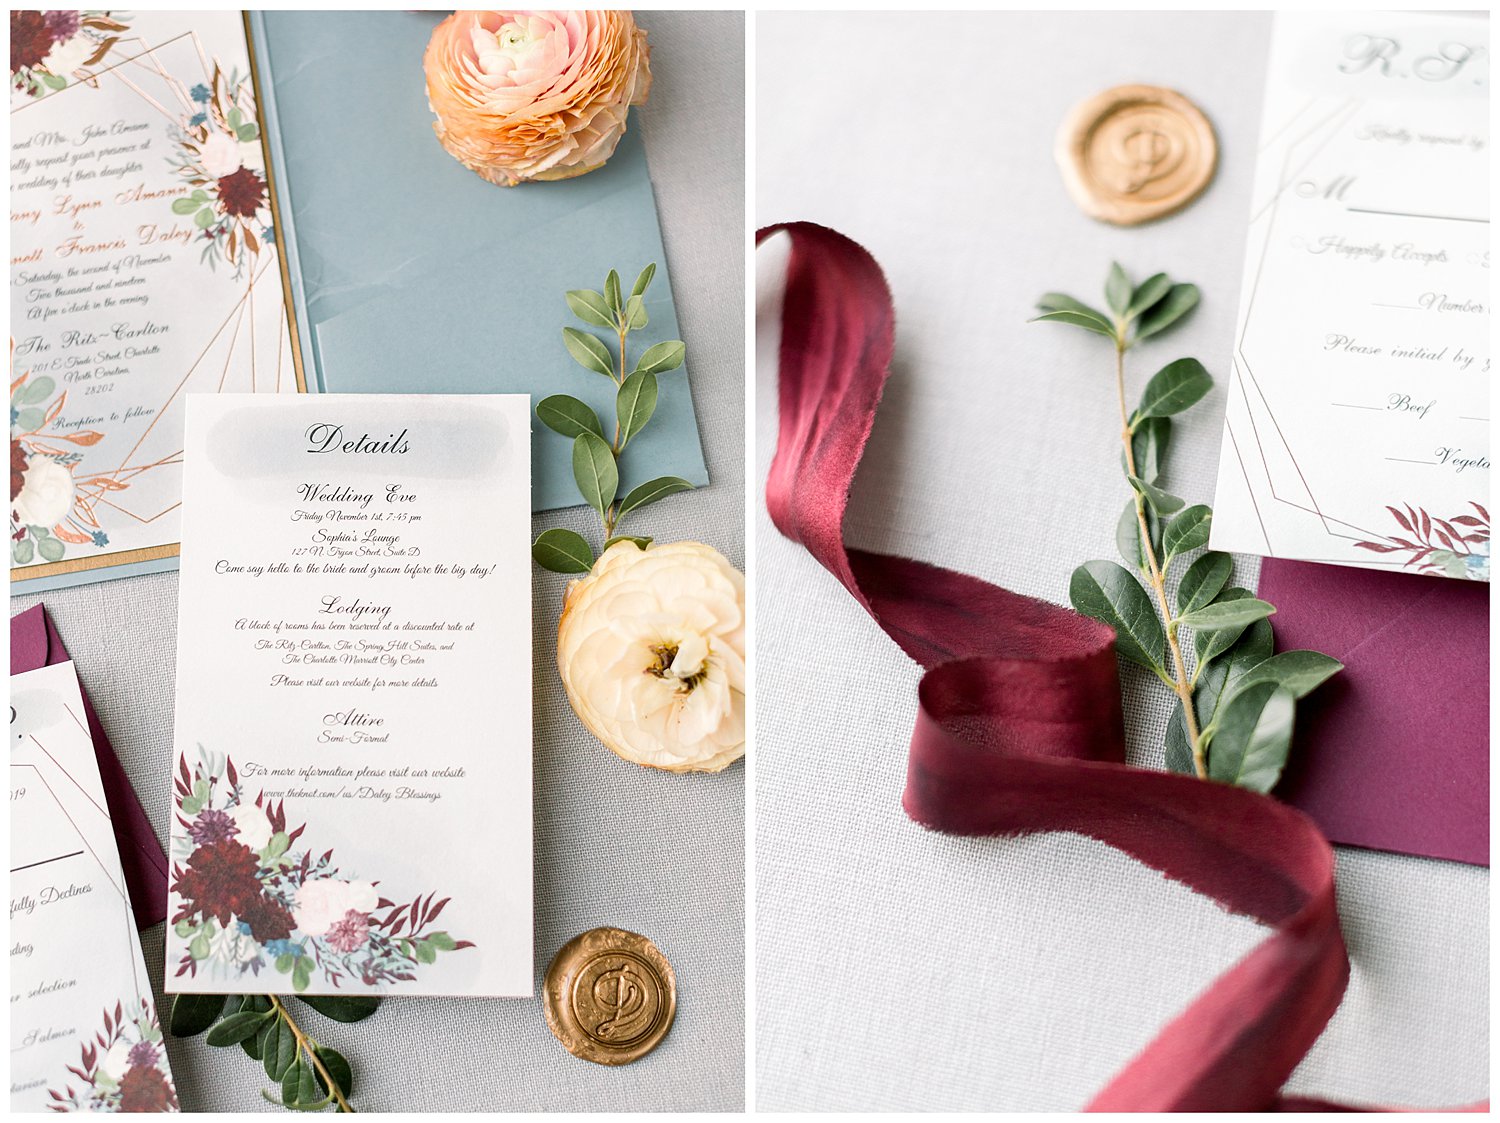 Blue and burgundy wedding invitation suite with wax seal